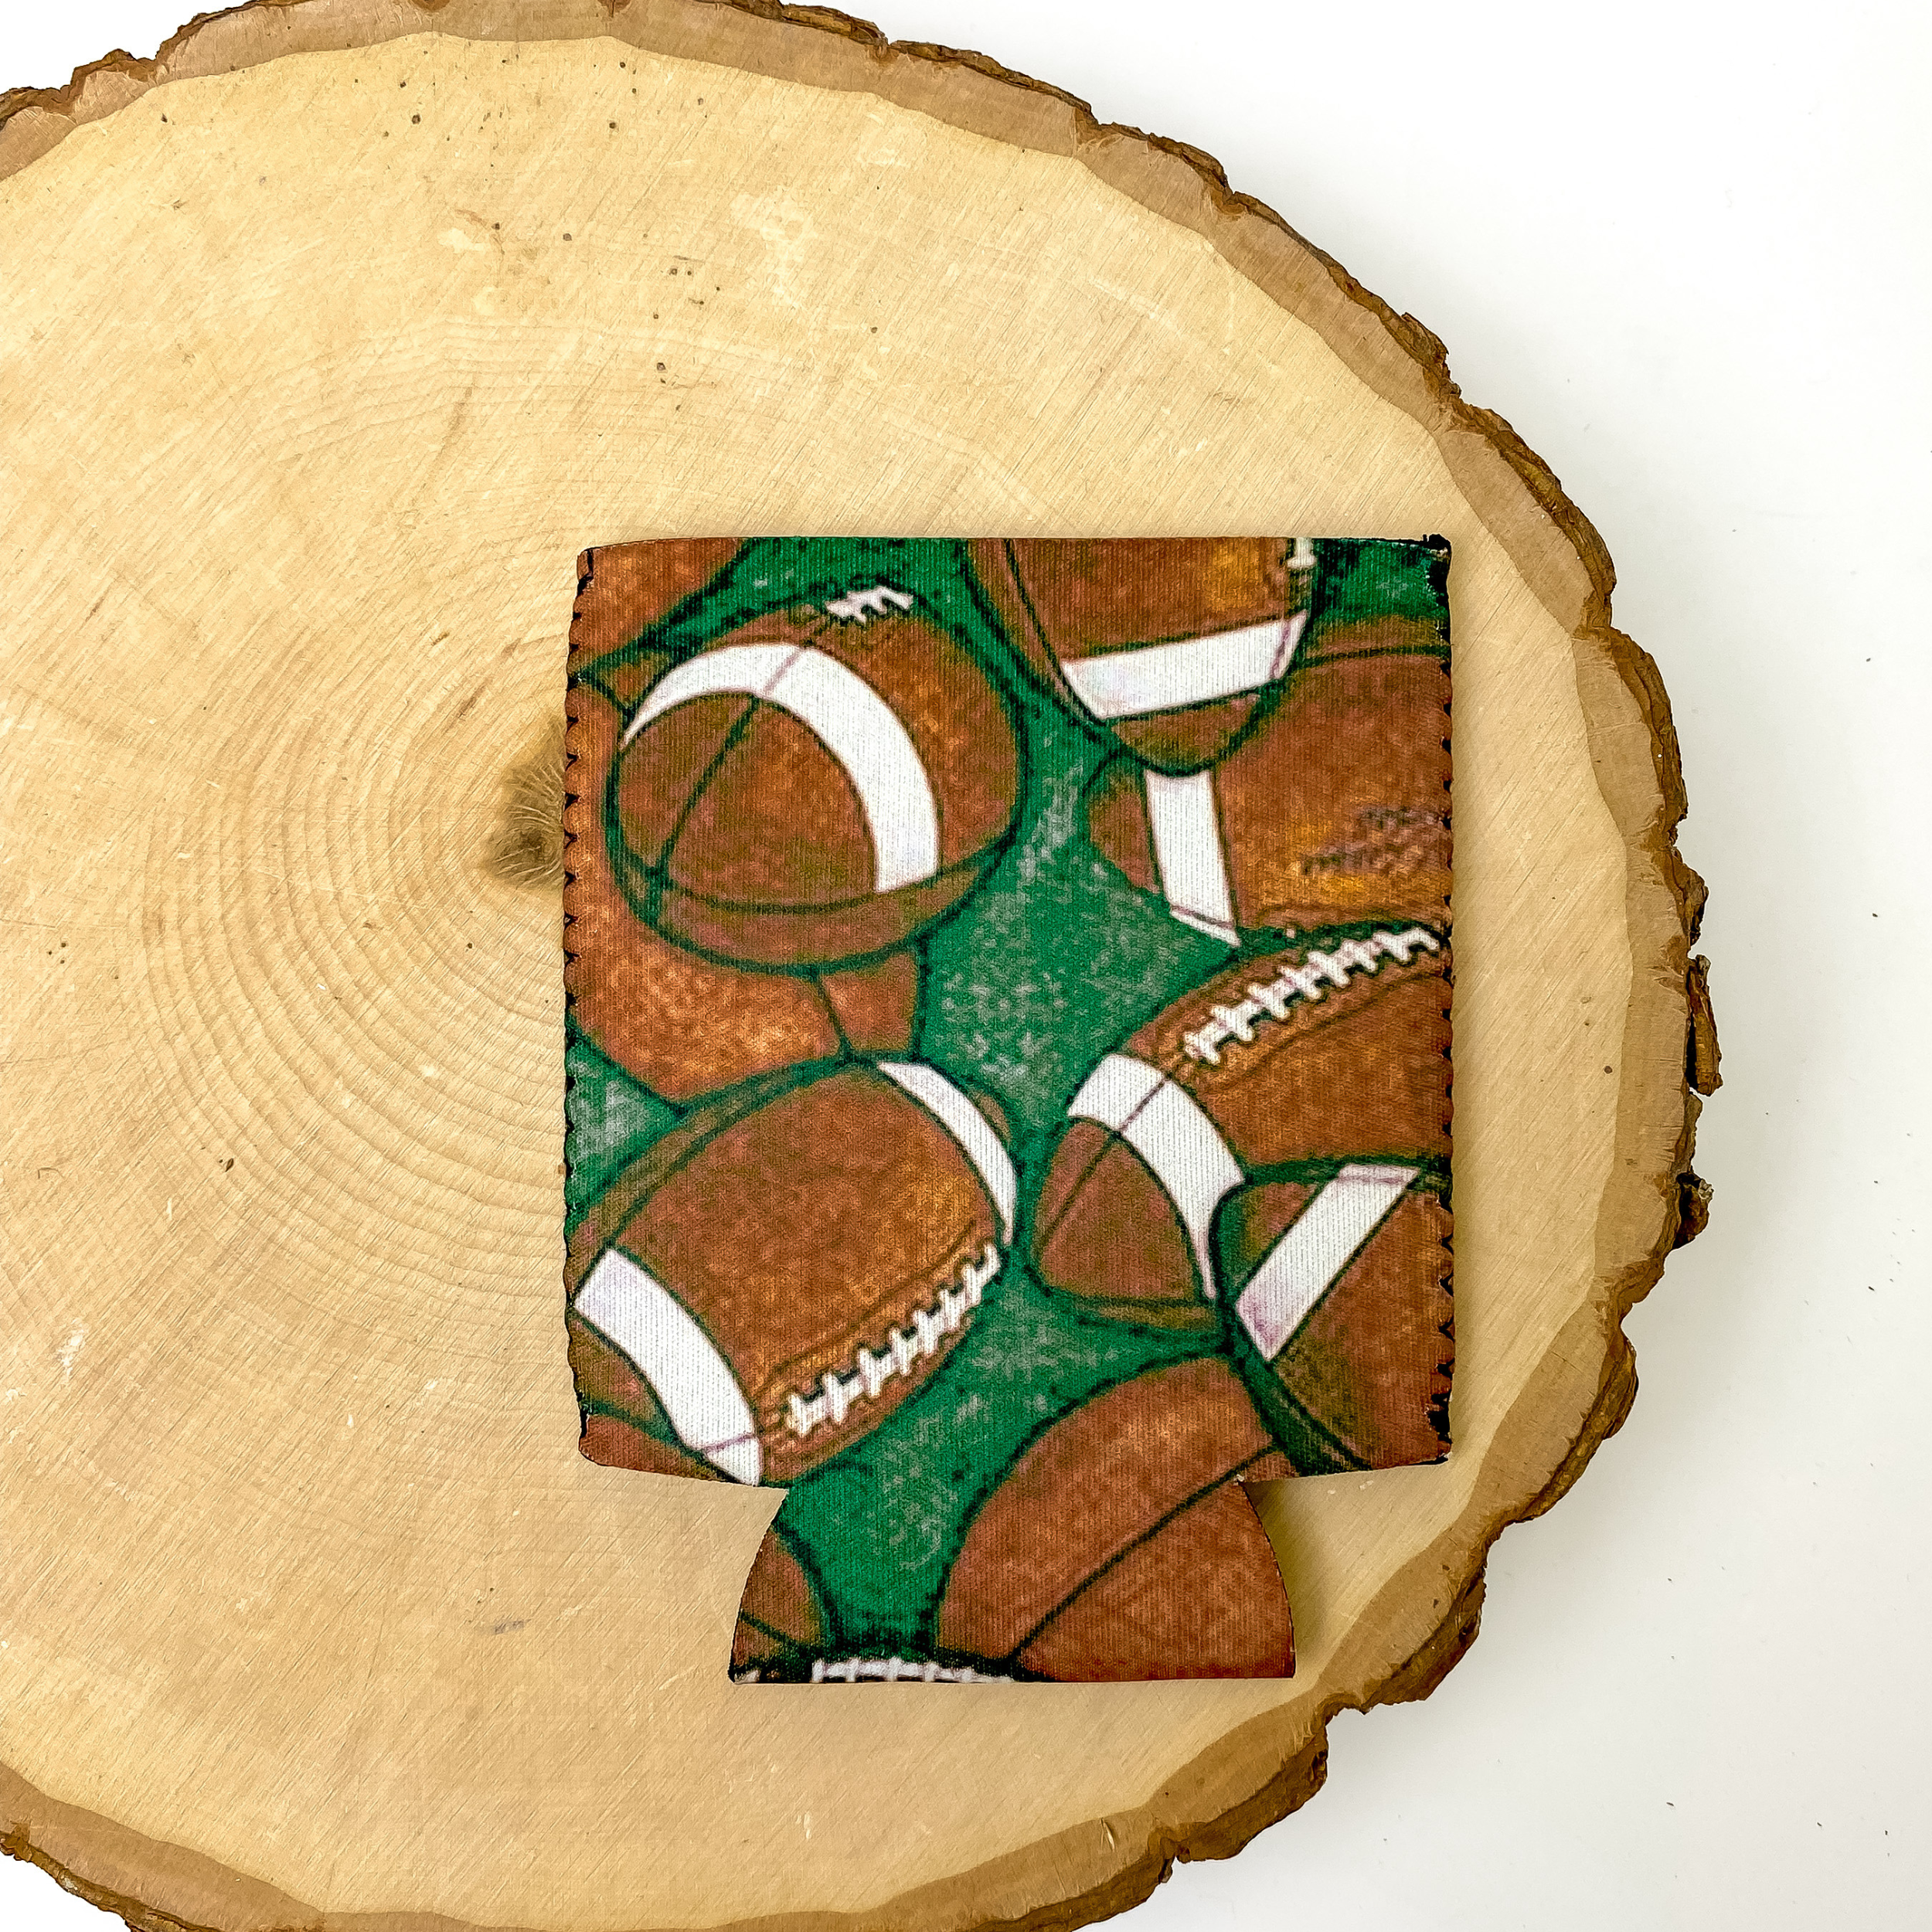 Football Print koozie with a faded green background. This koozie is pictured on a piece of wood on a white background.